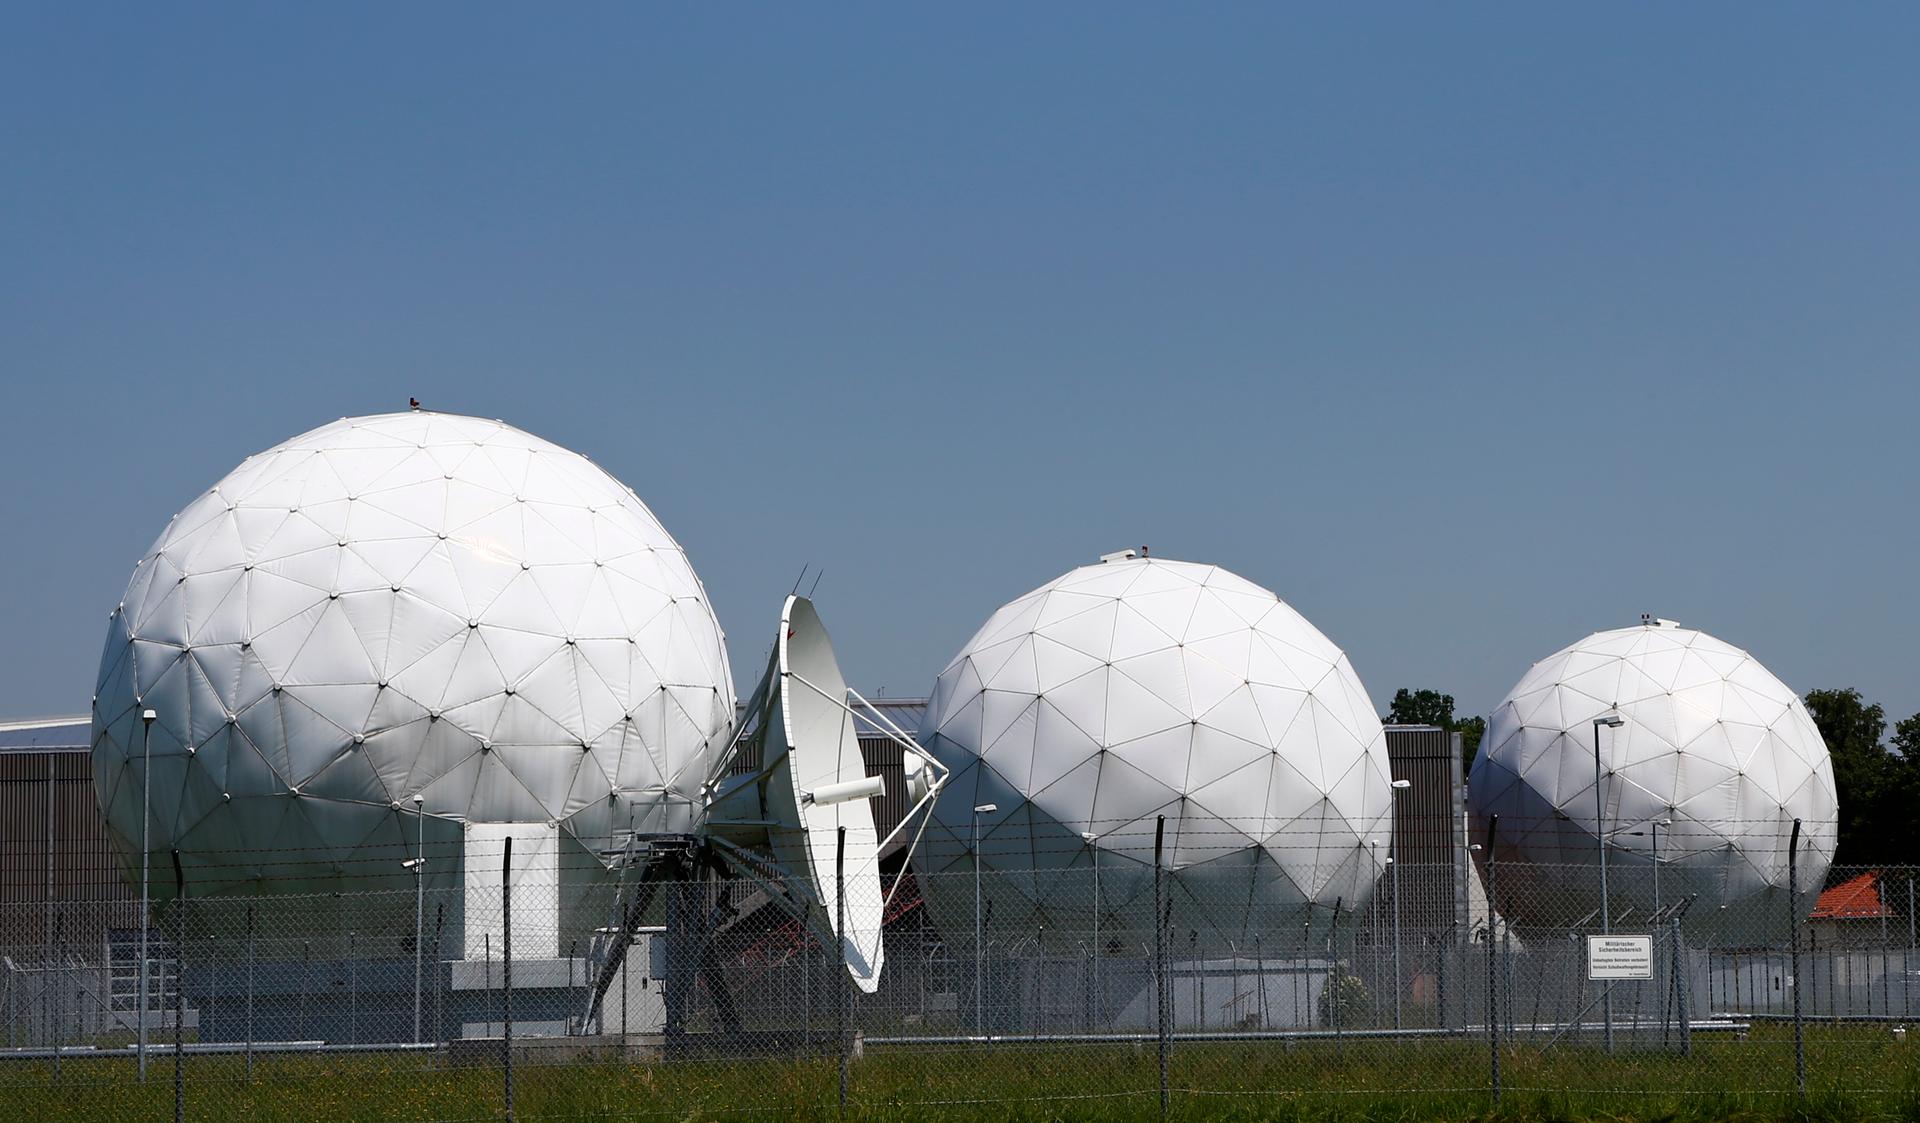 A view of sensor arrays at a former NSA monitoring base in Bad Aibling in Bavaria, Germany.